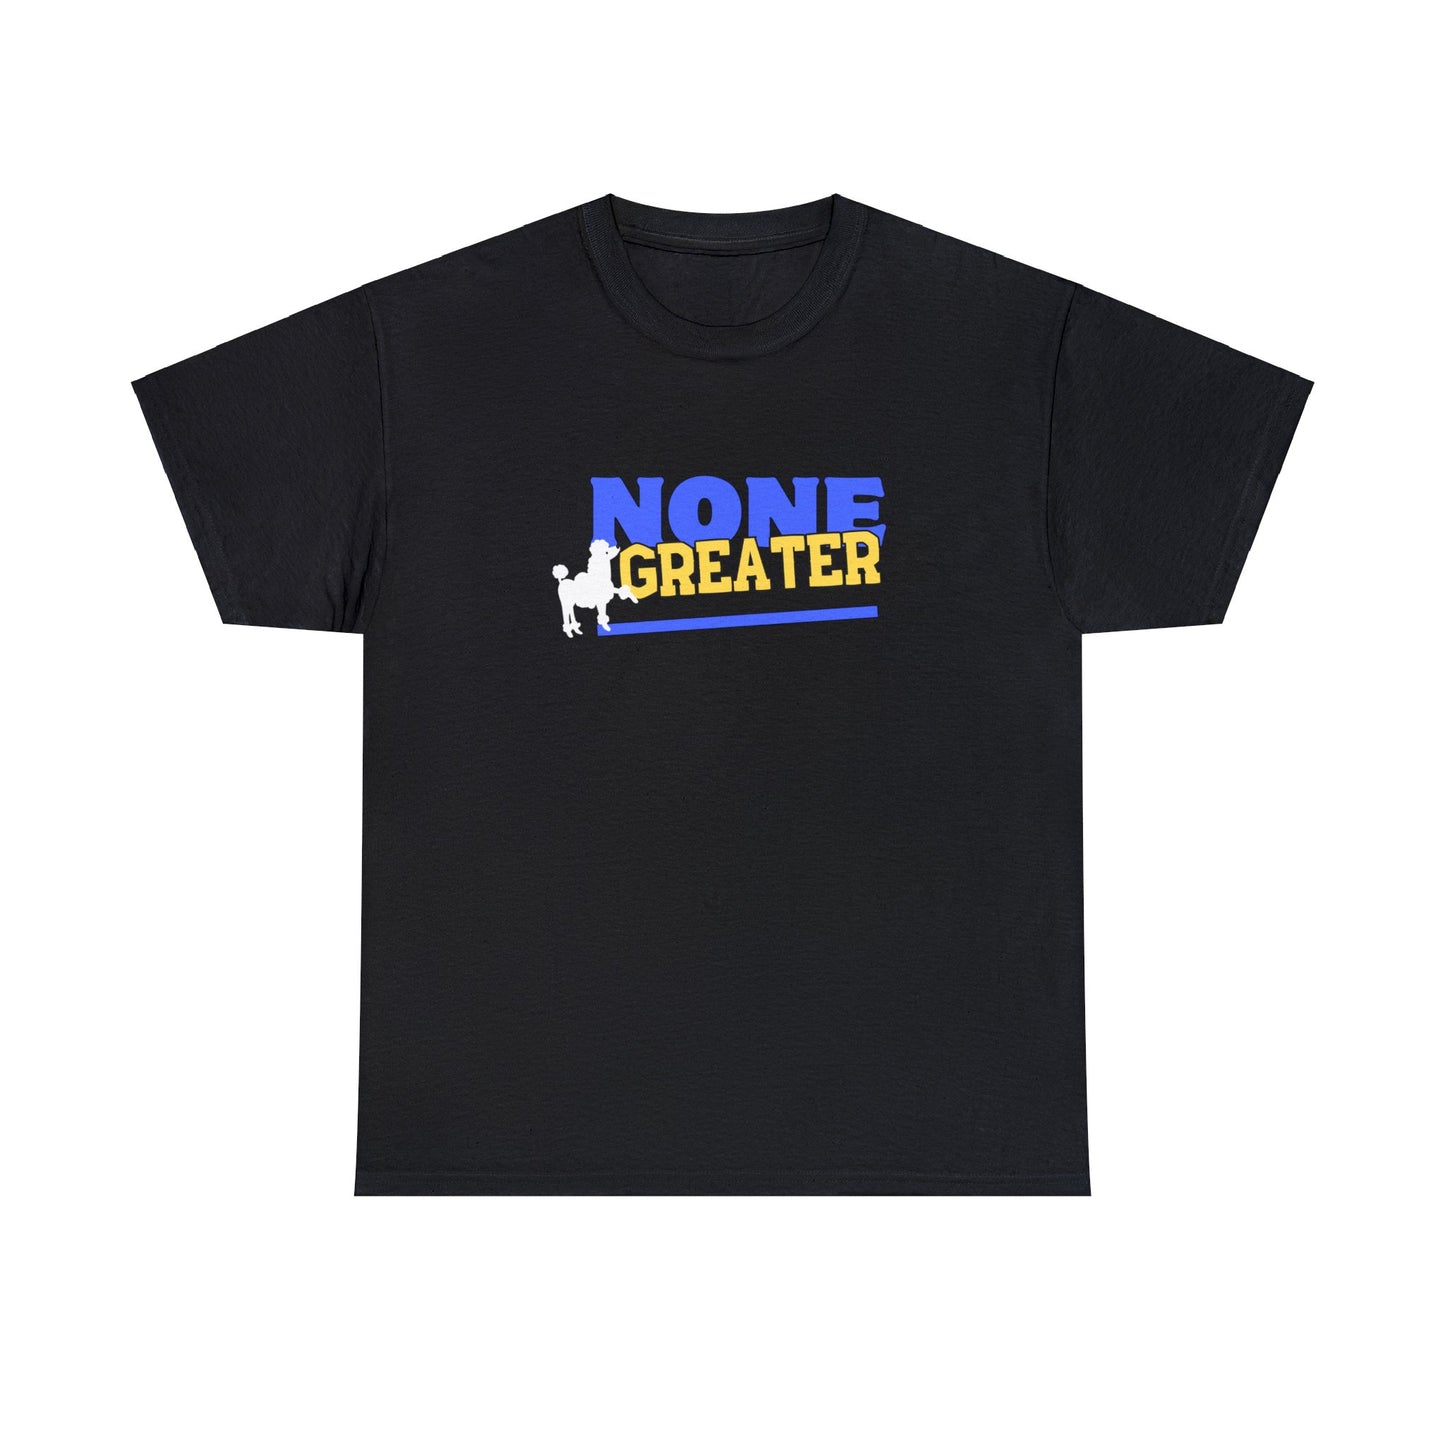 Black Unisex Heavy Cotton Tee saying "None Greater In Royal Blue and Gold w/a white dog